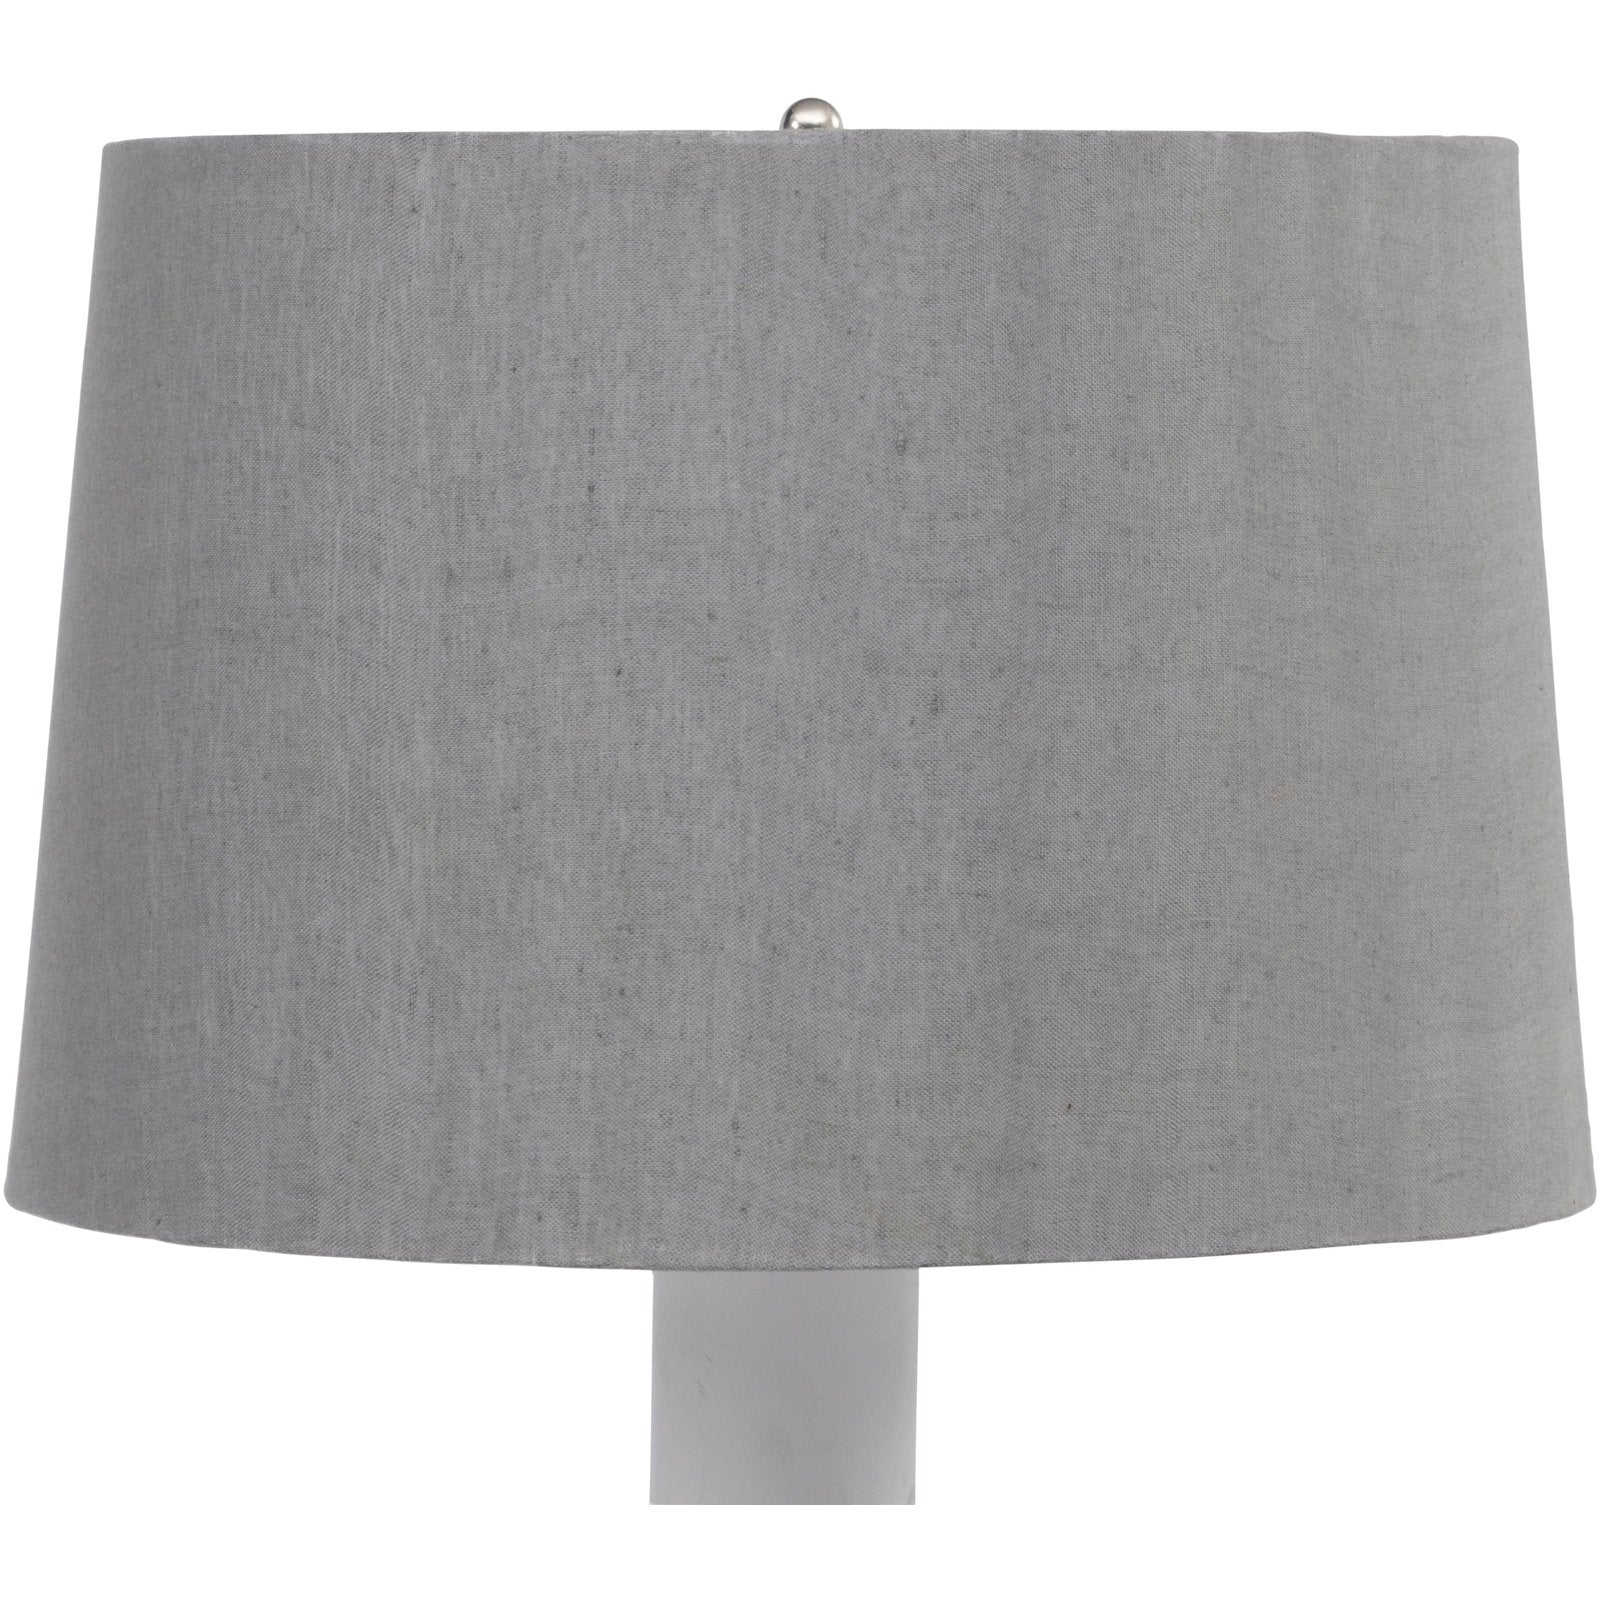 Troika Floor Lamp With Grey Shade E27 40W